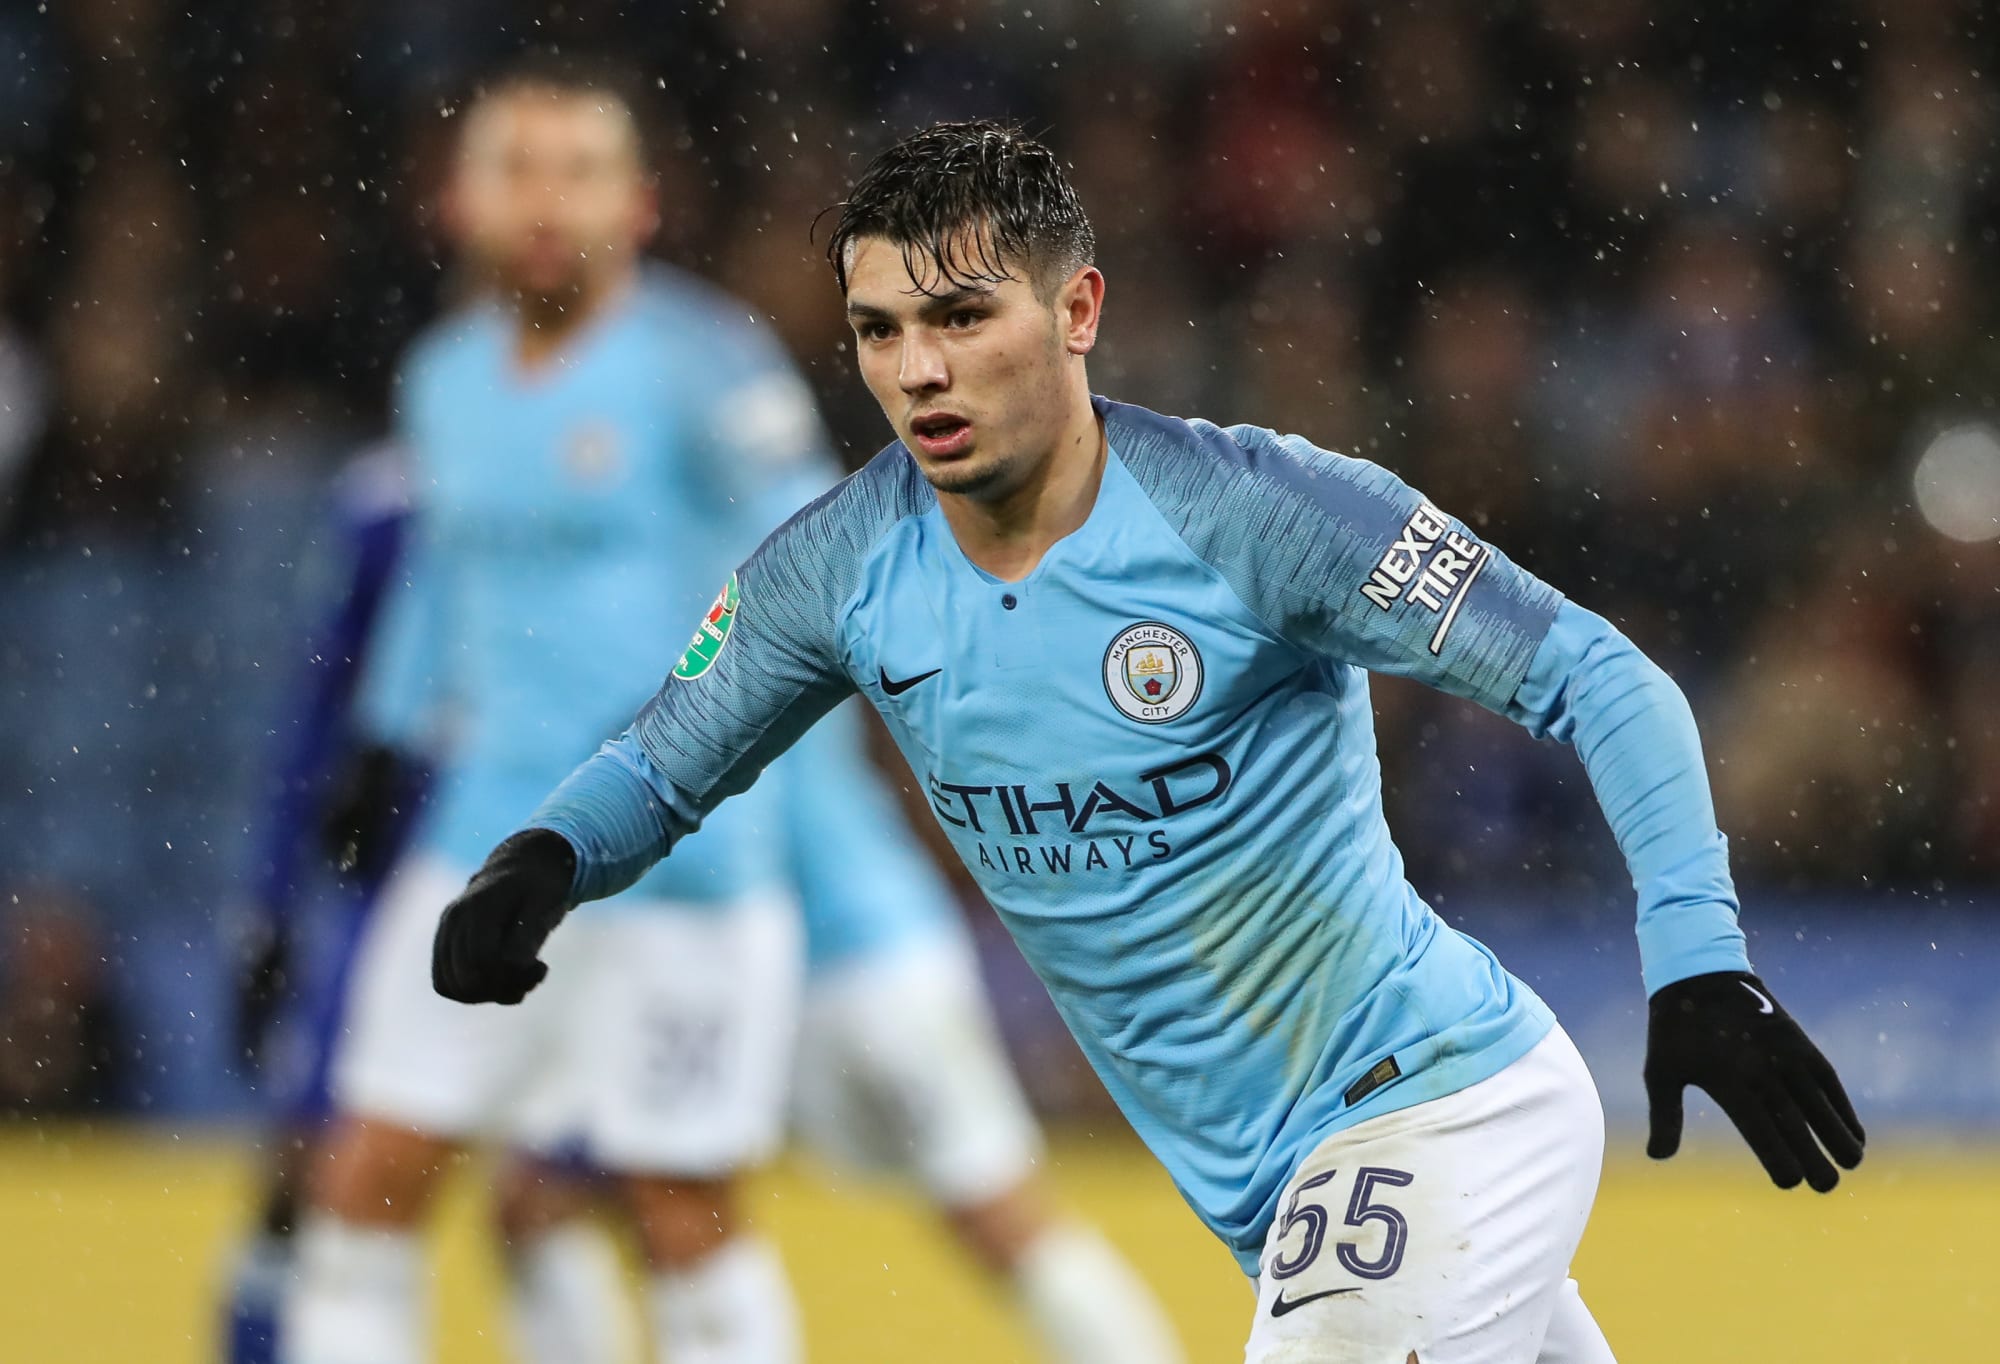 Brahim Diaz will join Real Madrid in a week